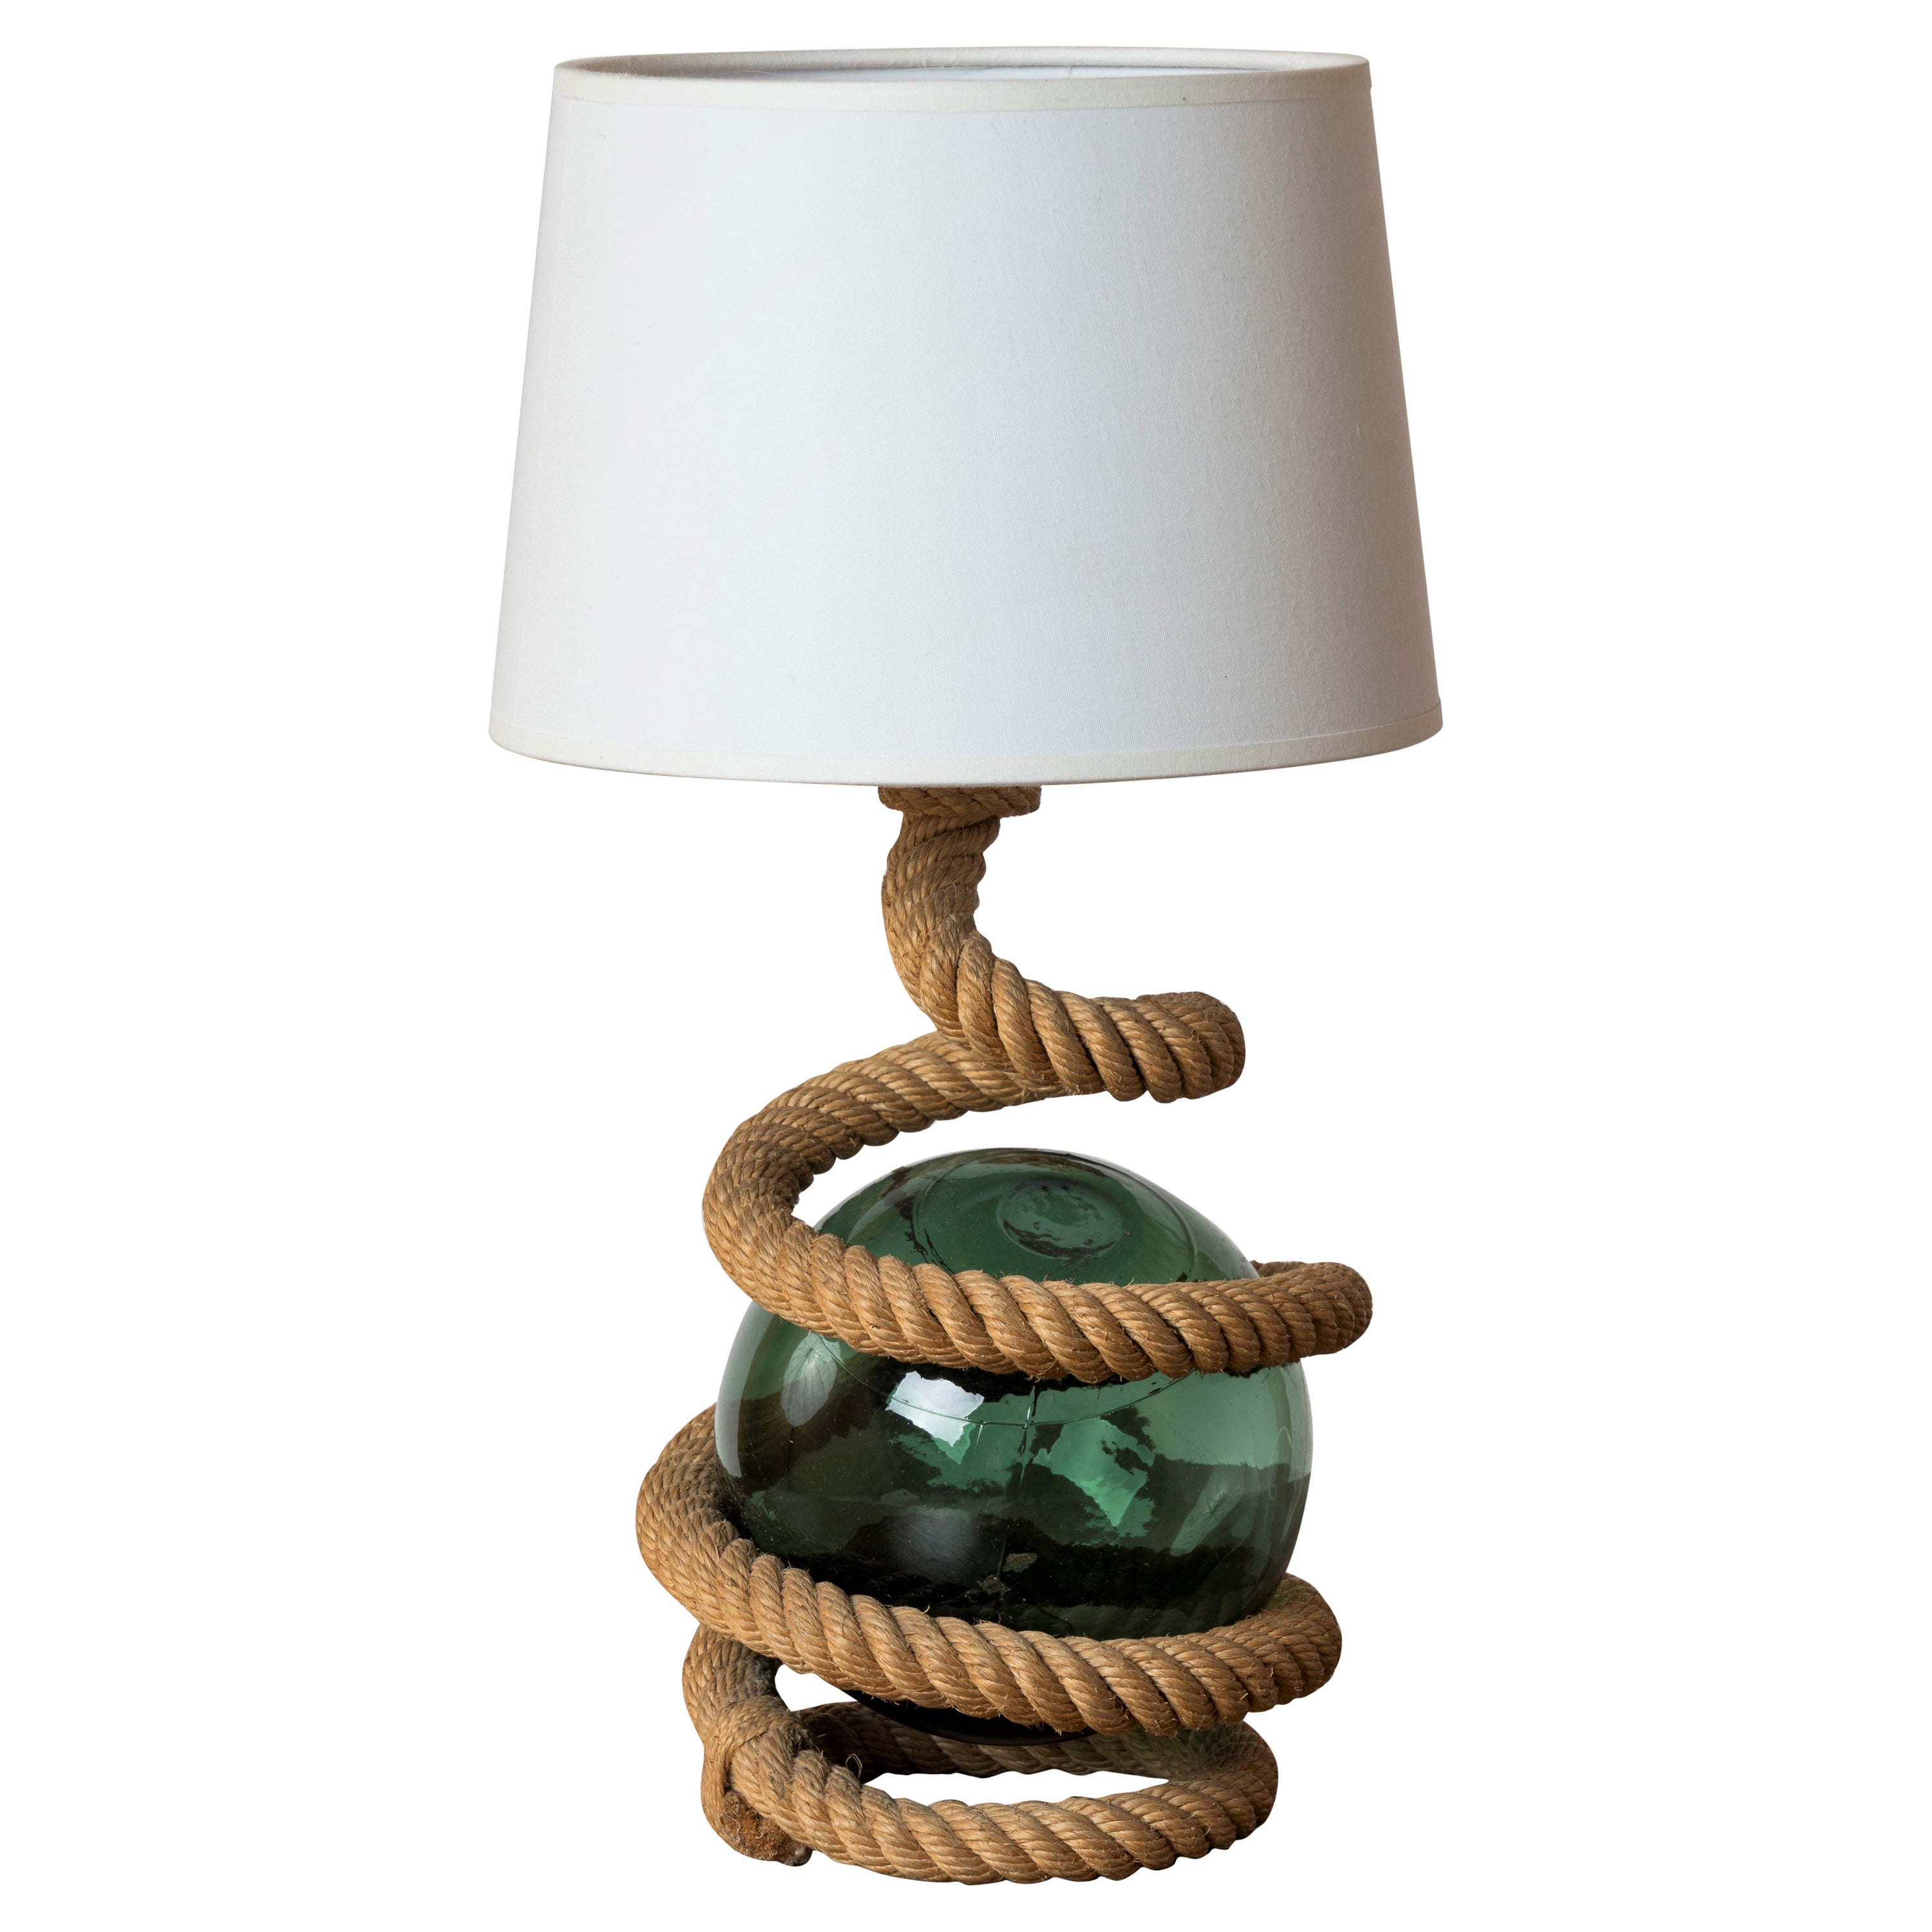 Rope and Marine Green Glass Ball Table Lamp Att. Audoux Minnet, France 1960s For Sale